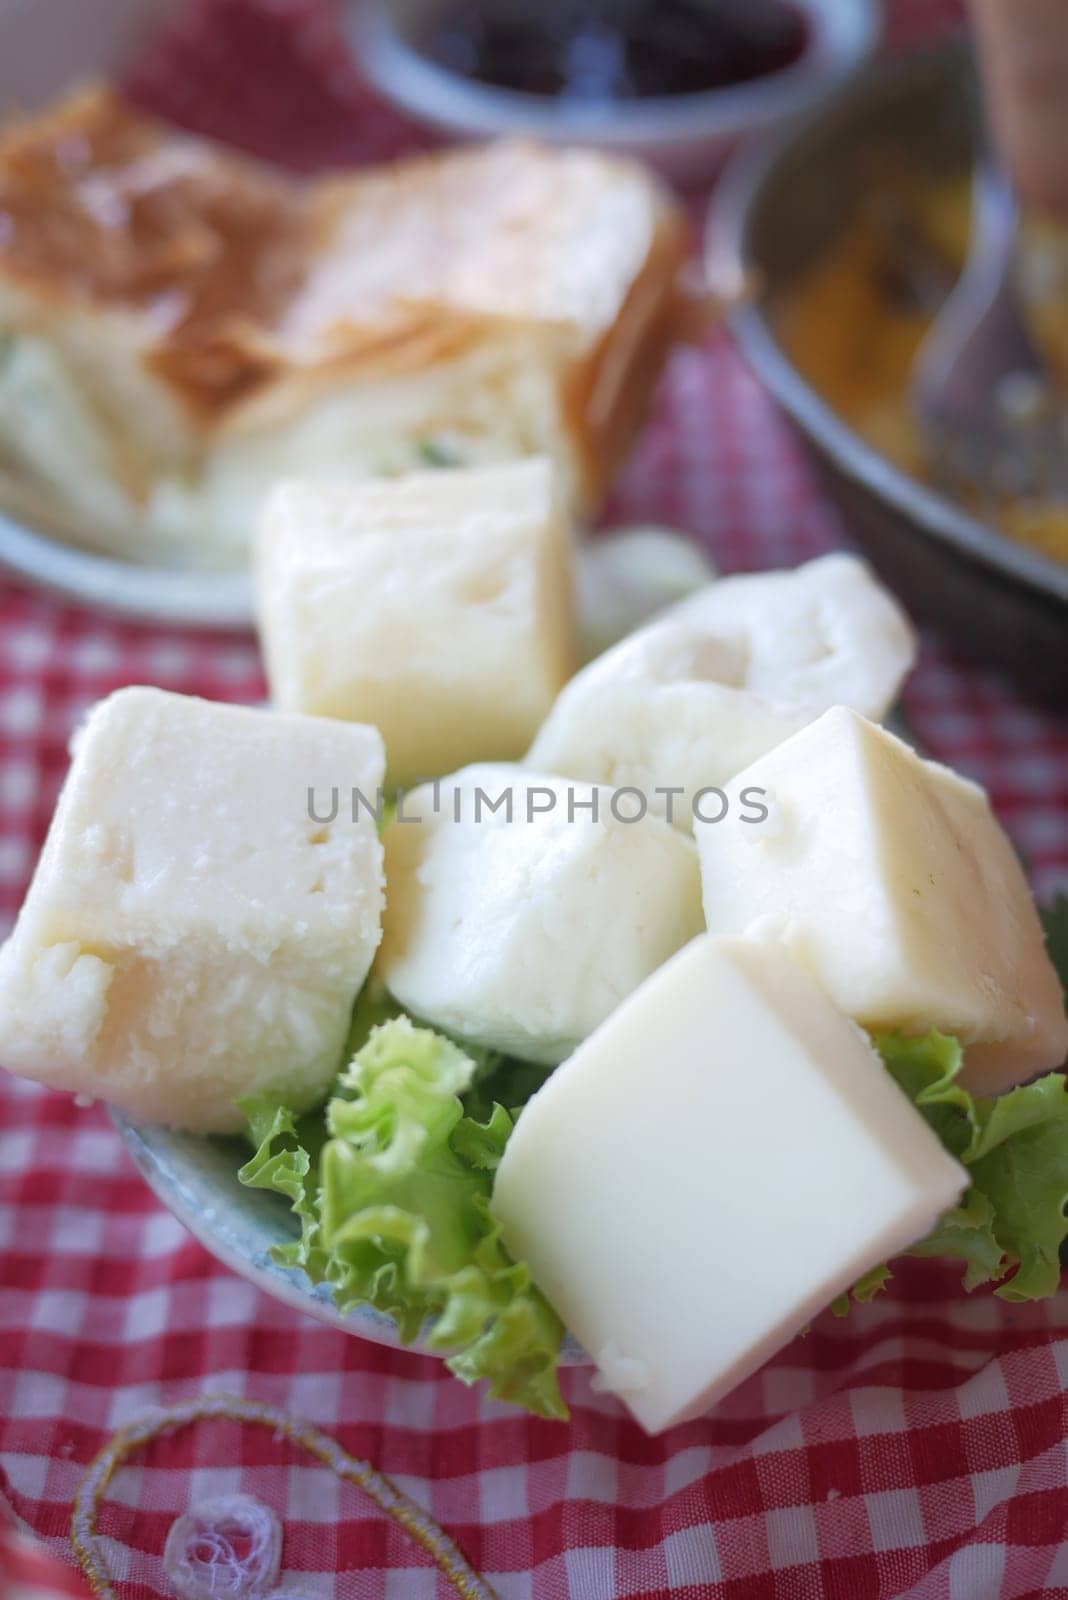 Food plate of cheese cubes and lettuce on checkered tablecloth.